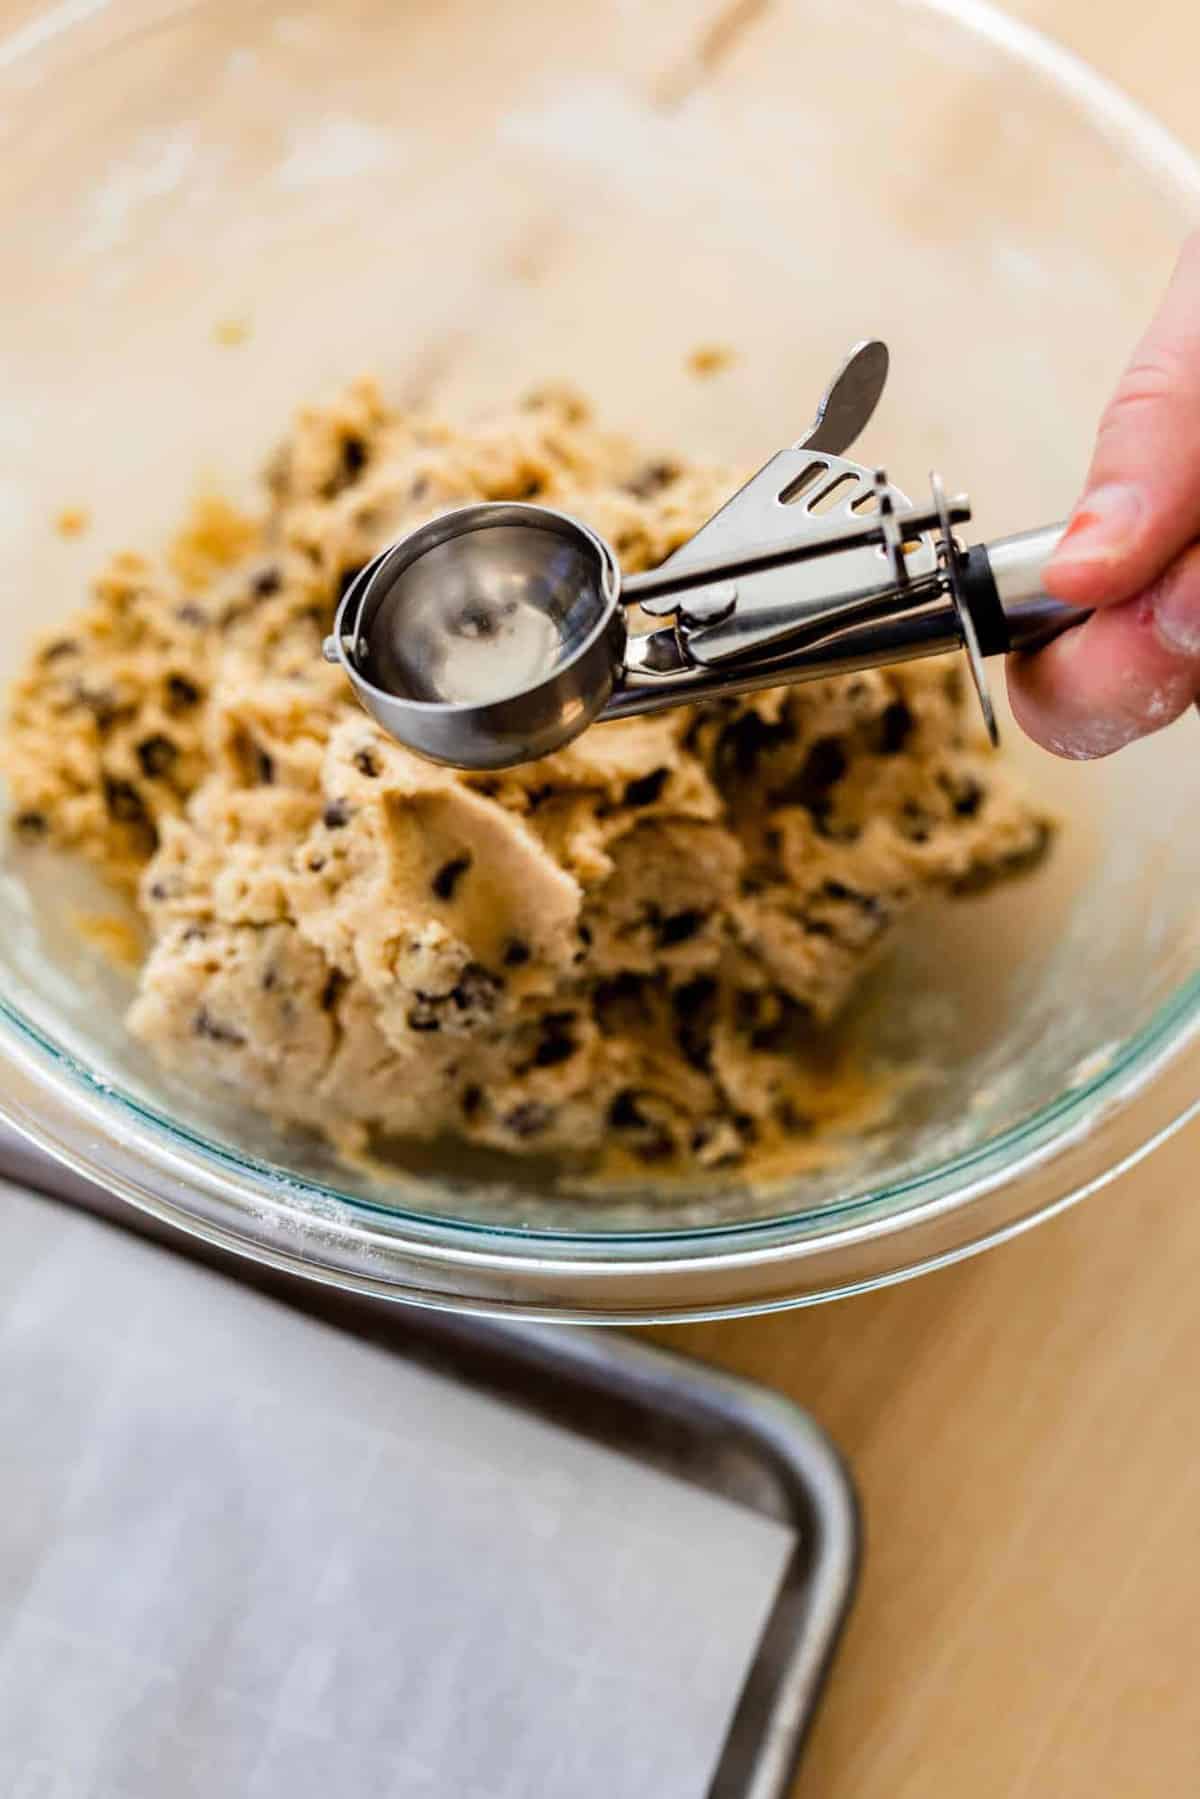 Ashley holds a cookie scoop over a bowl of cookie dough next to a baking sheet.